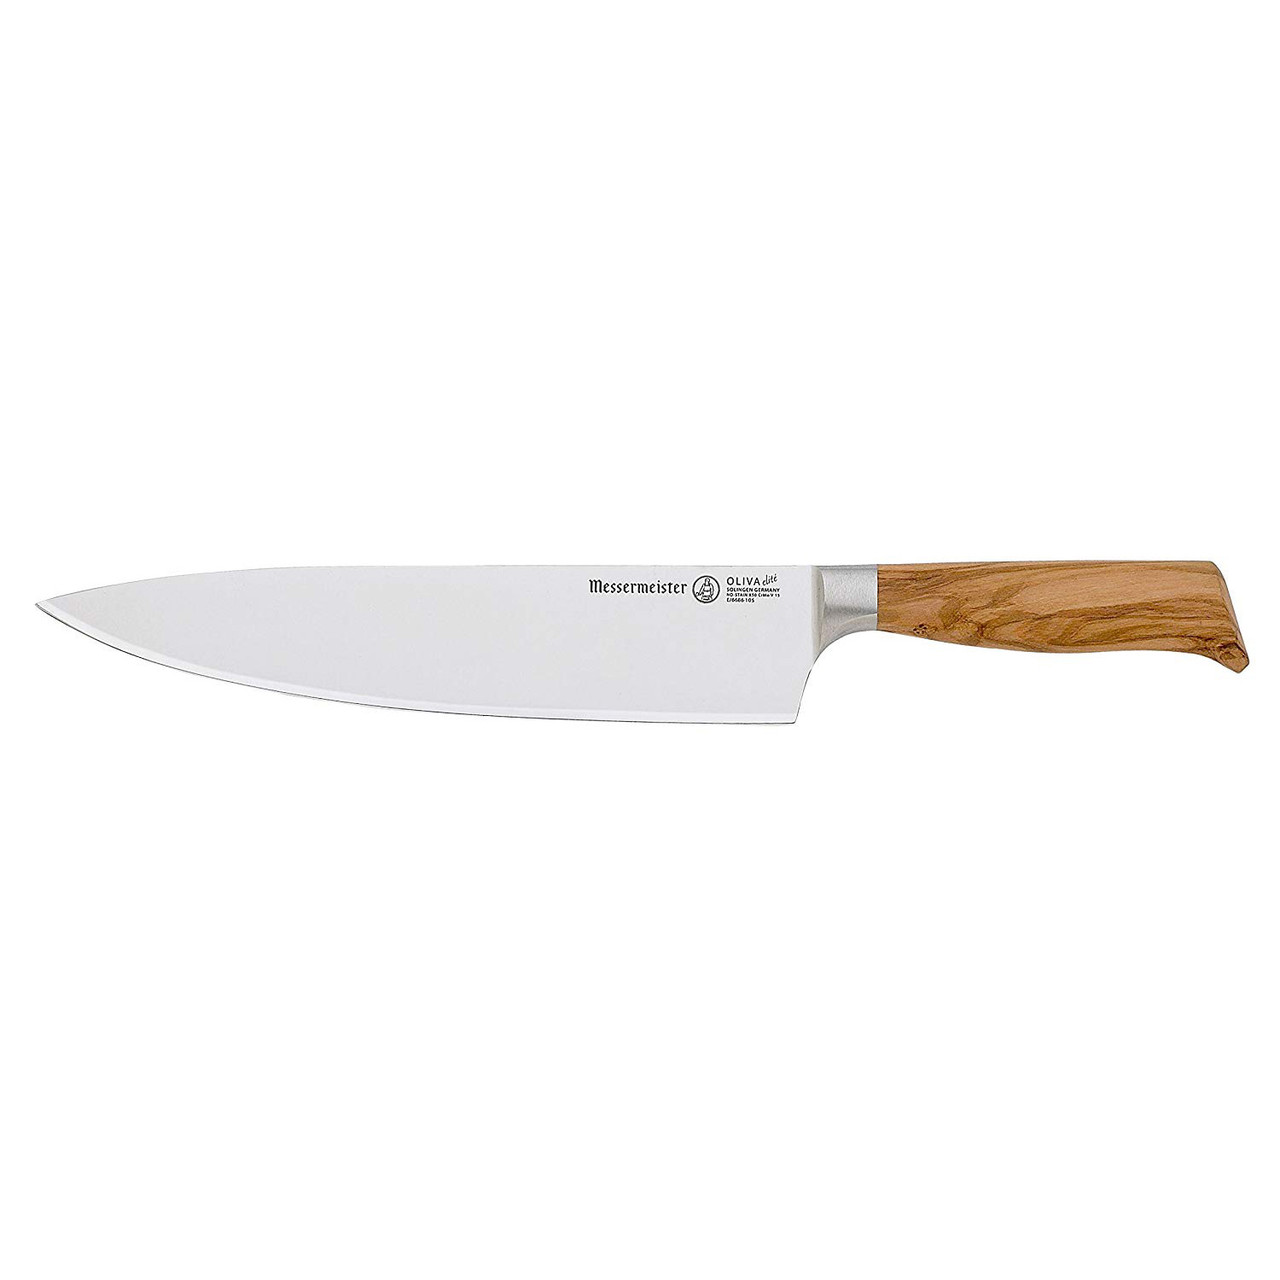 https://cdn11.bigcommerce.com/s-hccytny0od/images/stencil/1280x1280/products/2692/9503/messermeister-oliva-elite-chefs-knife-10in__02260.1593464161.jpg?c=2?imbypass=on